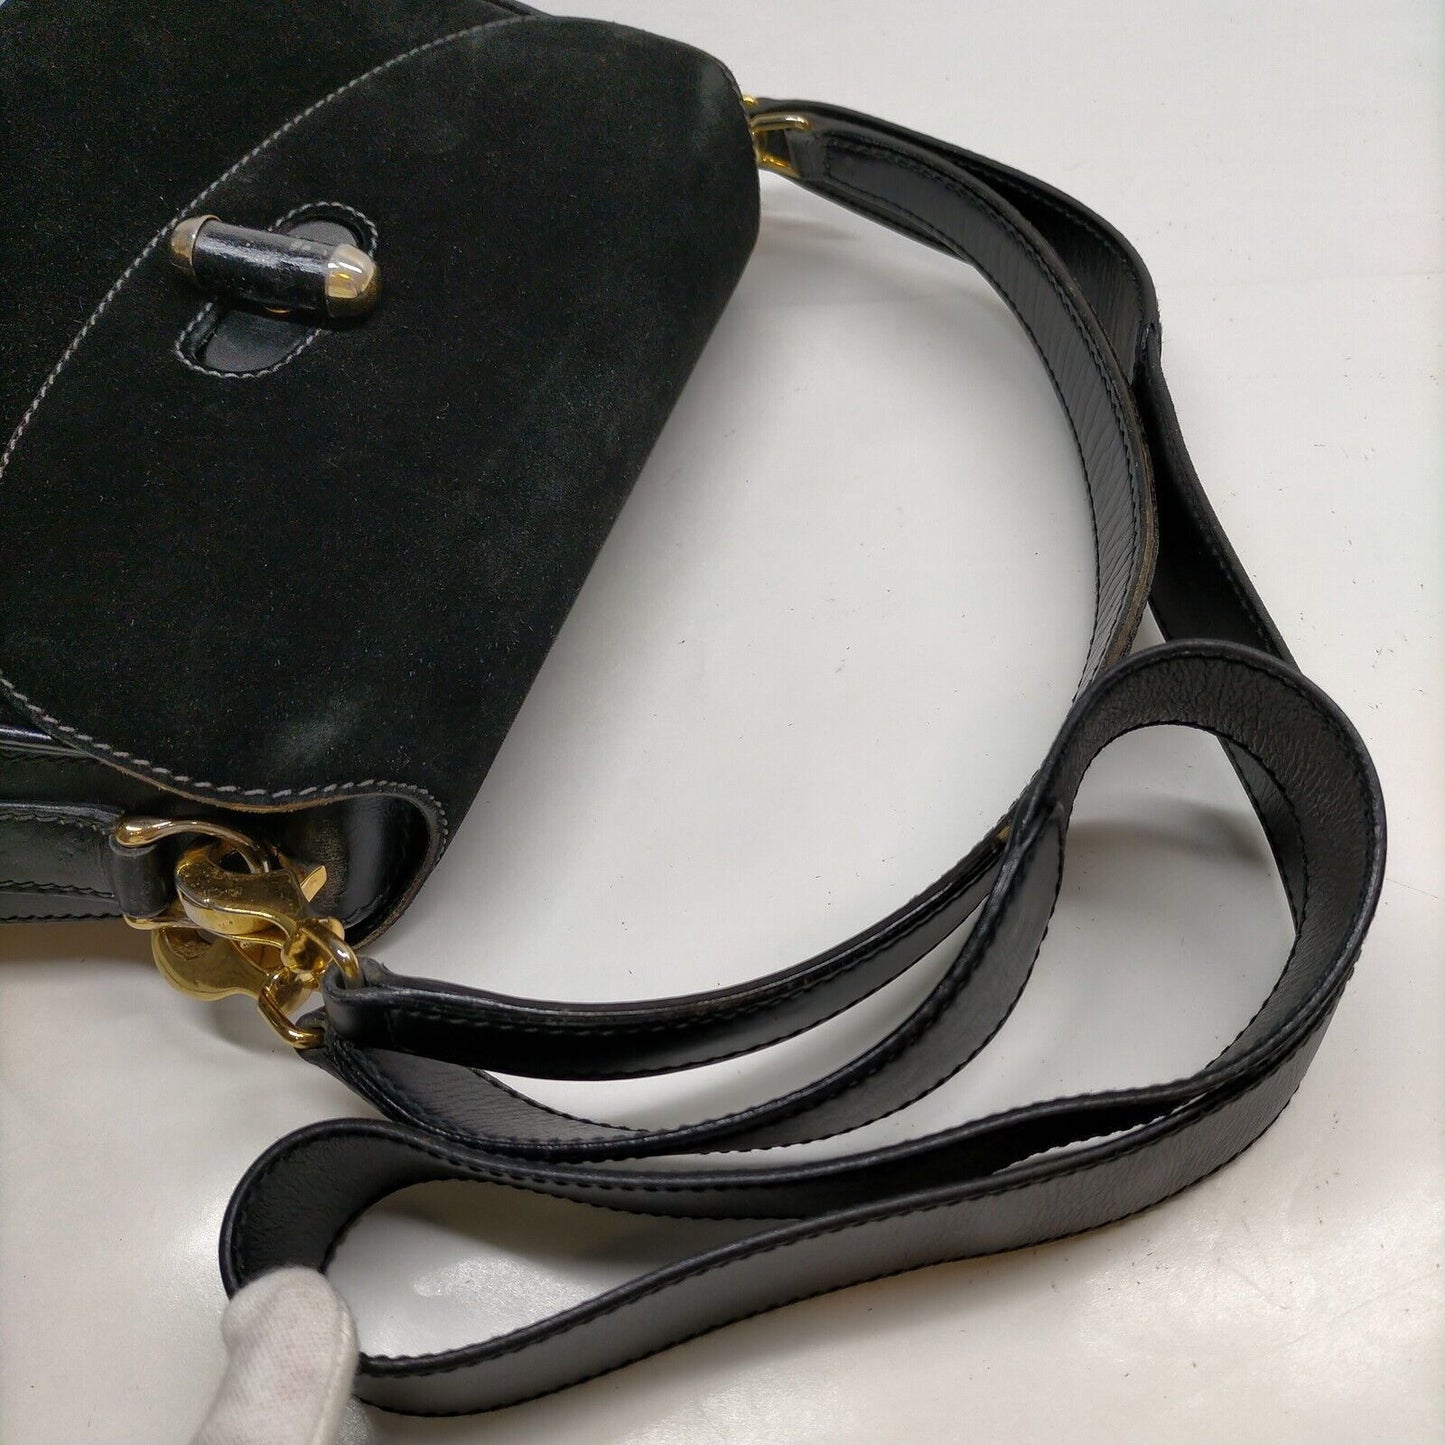 Gucci black leather and suede 1947 Bamboo two-way purse